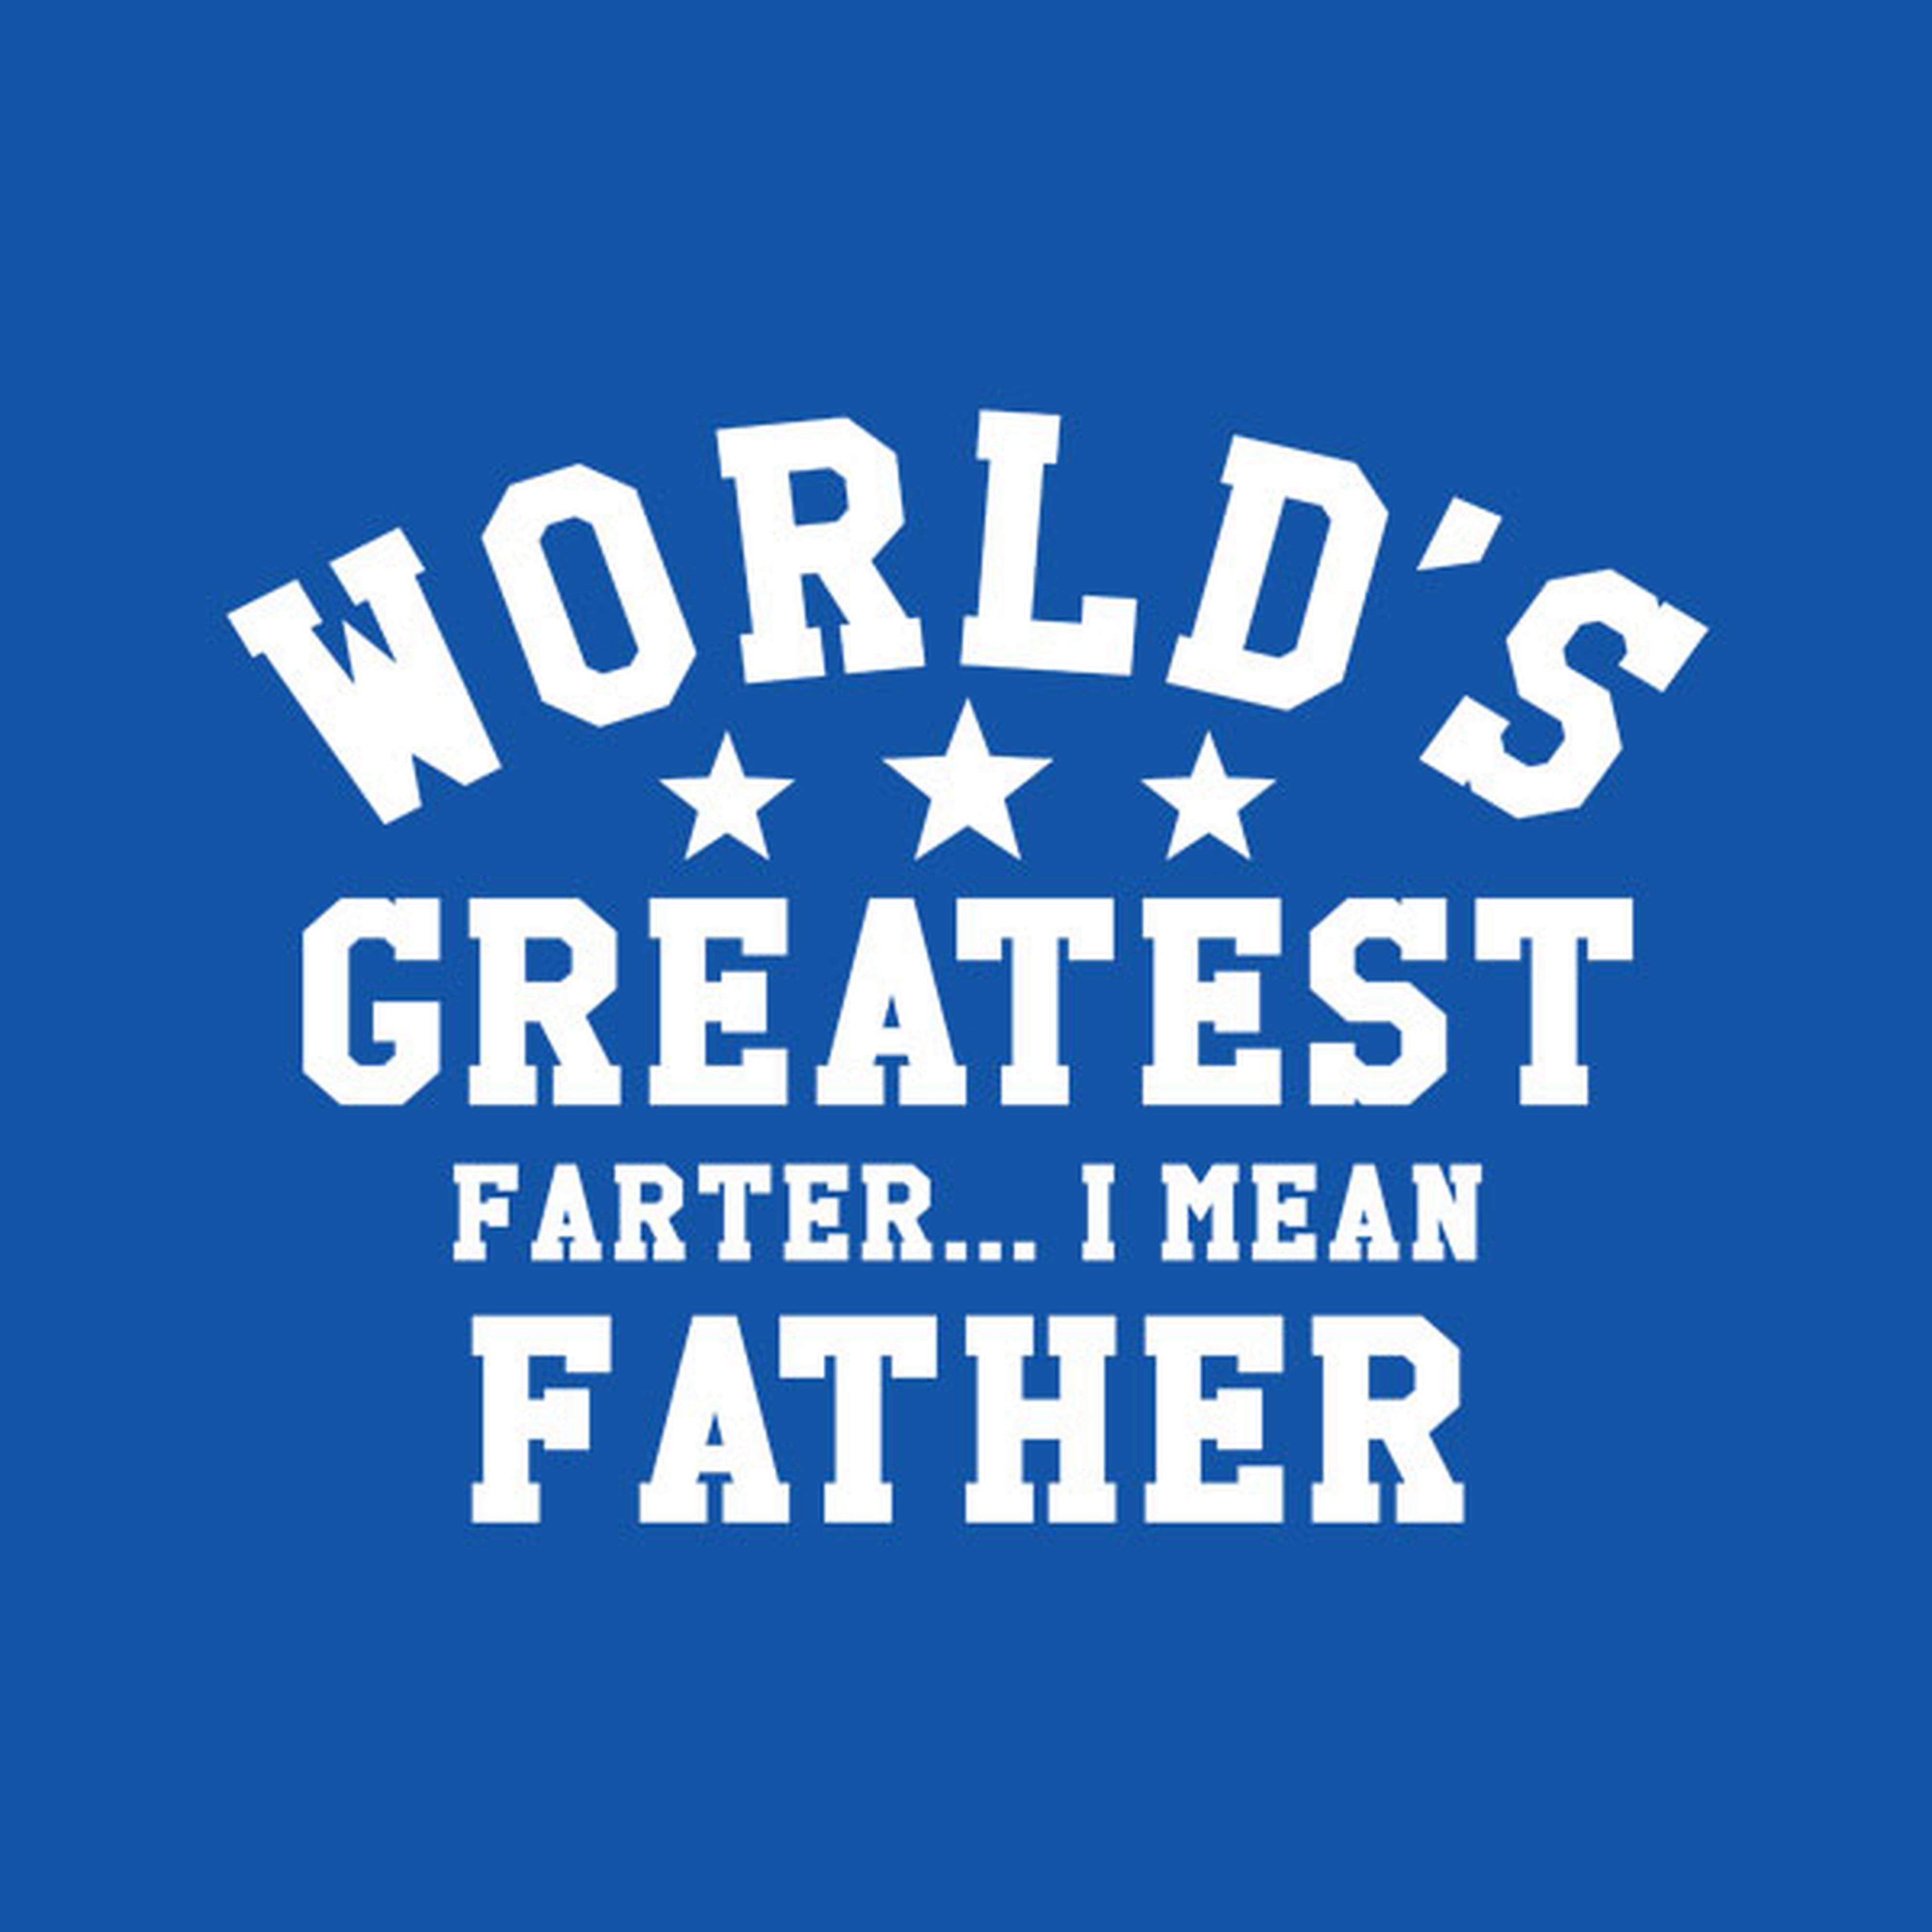 World's greatest farter... I mean father - T-shirt